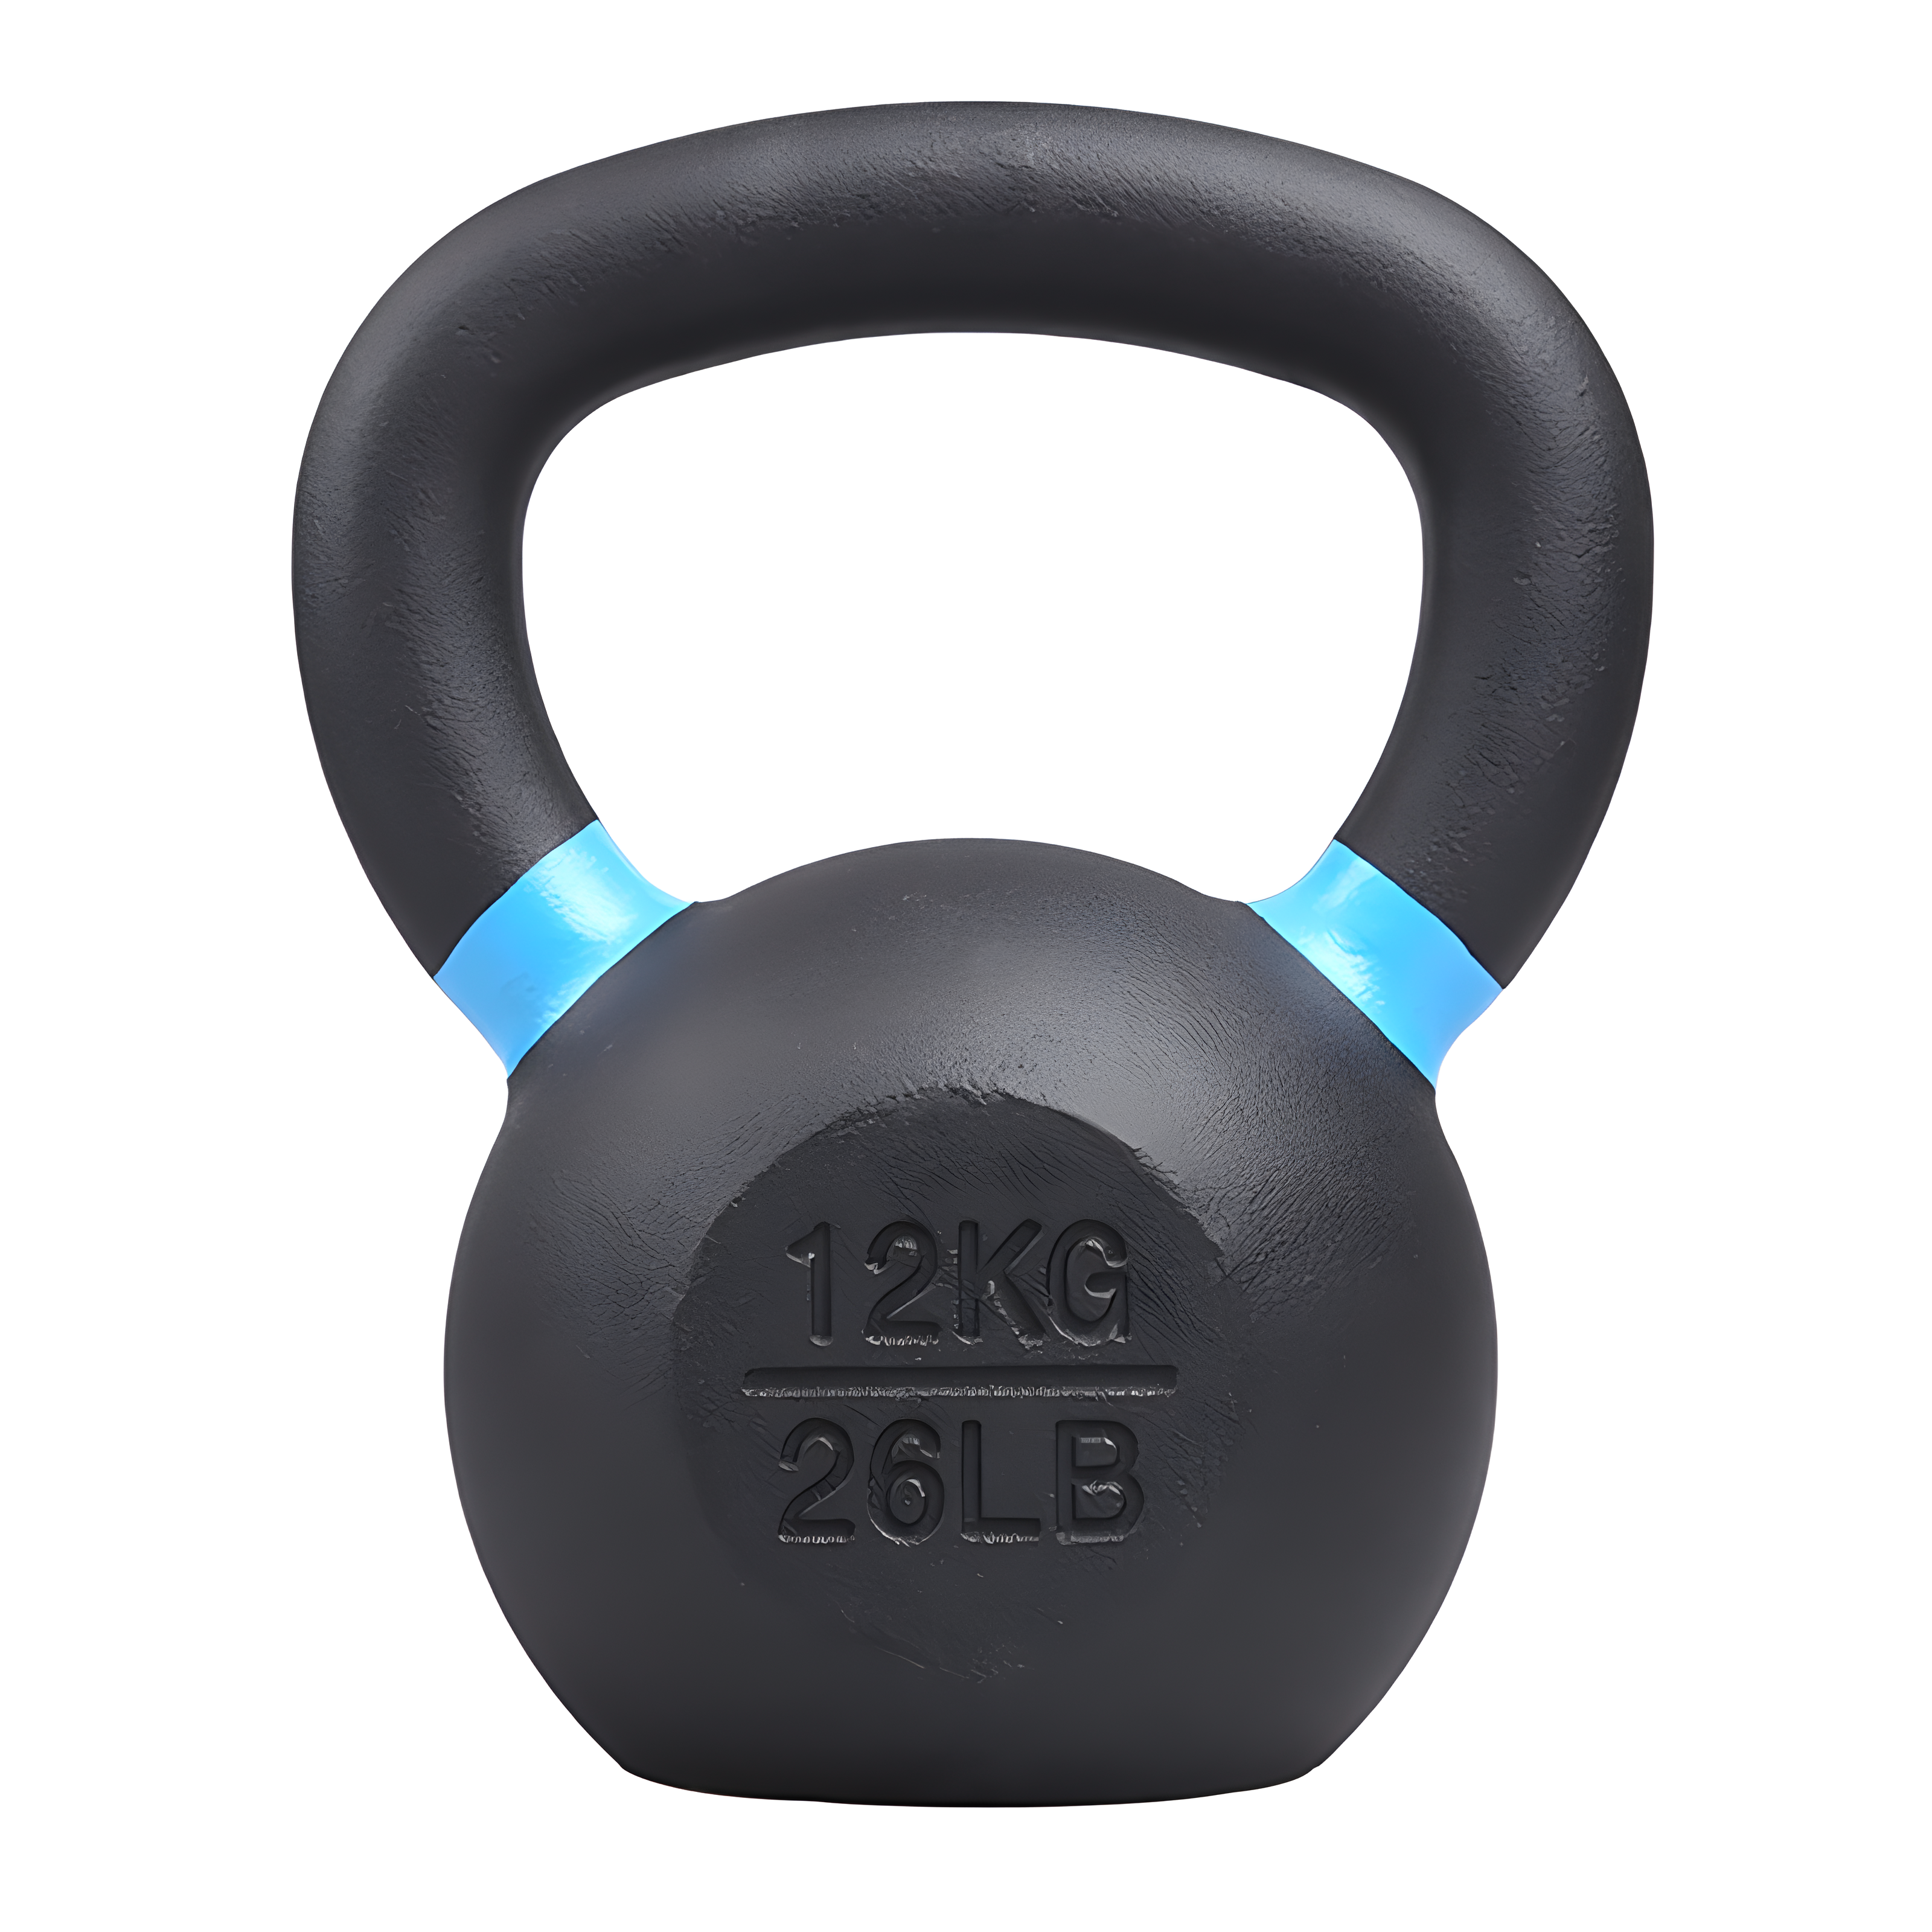 Powder Coated Cast Iron Kettlebell - Tag Fitness